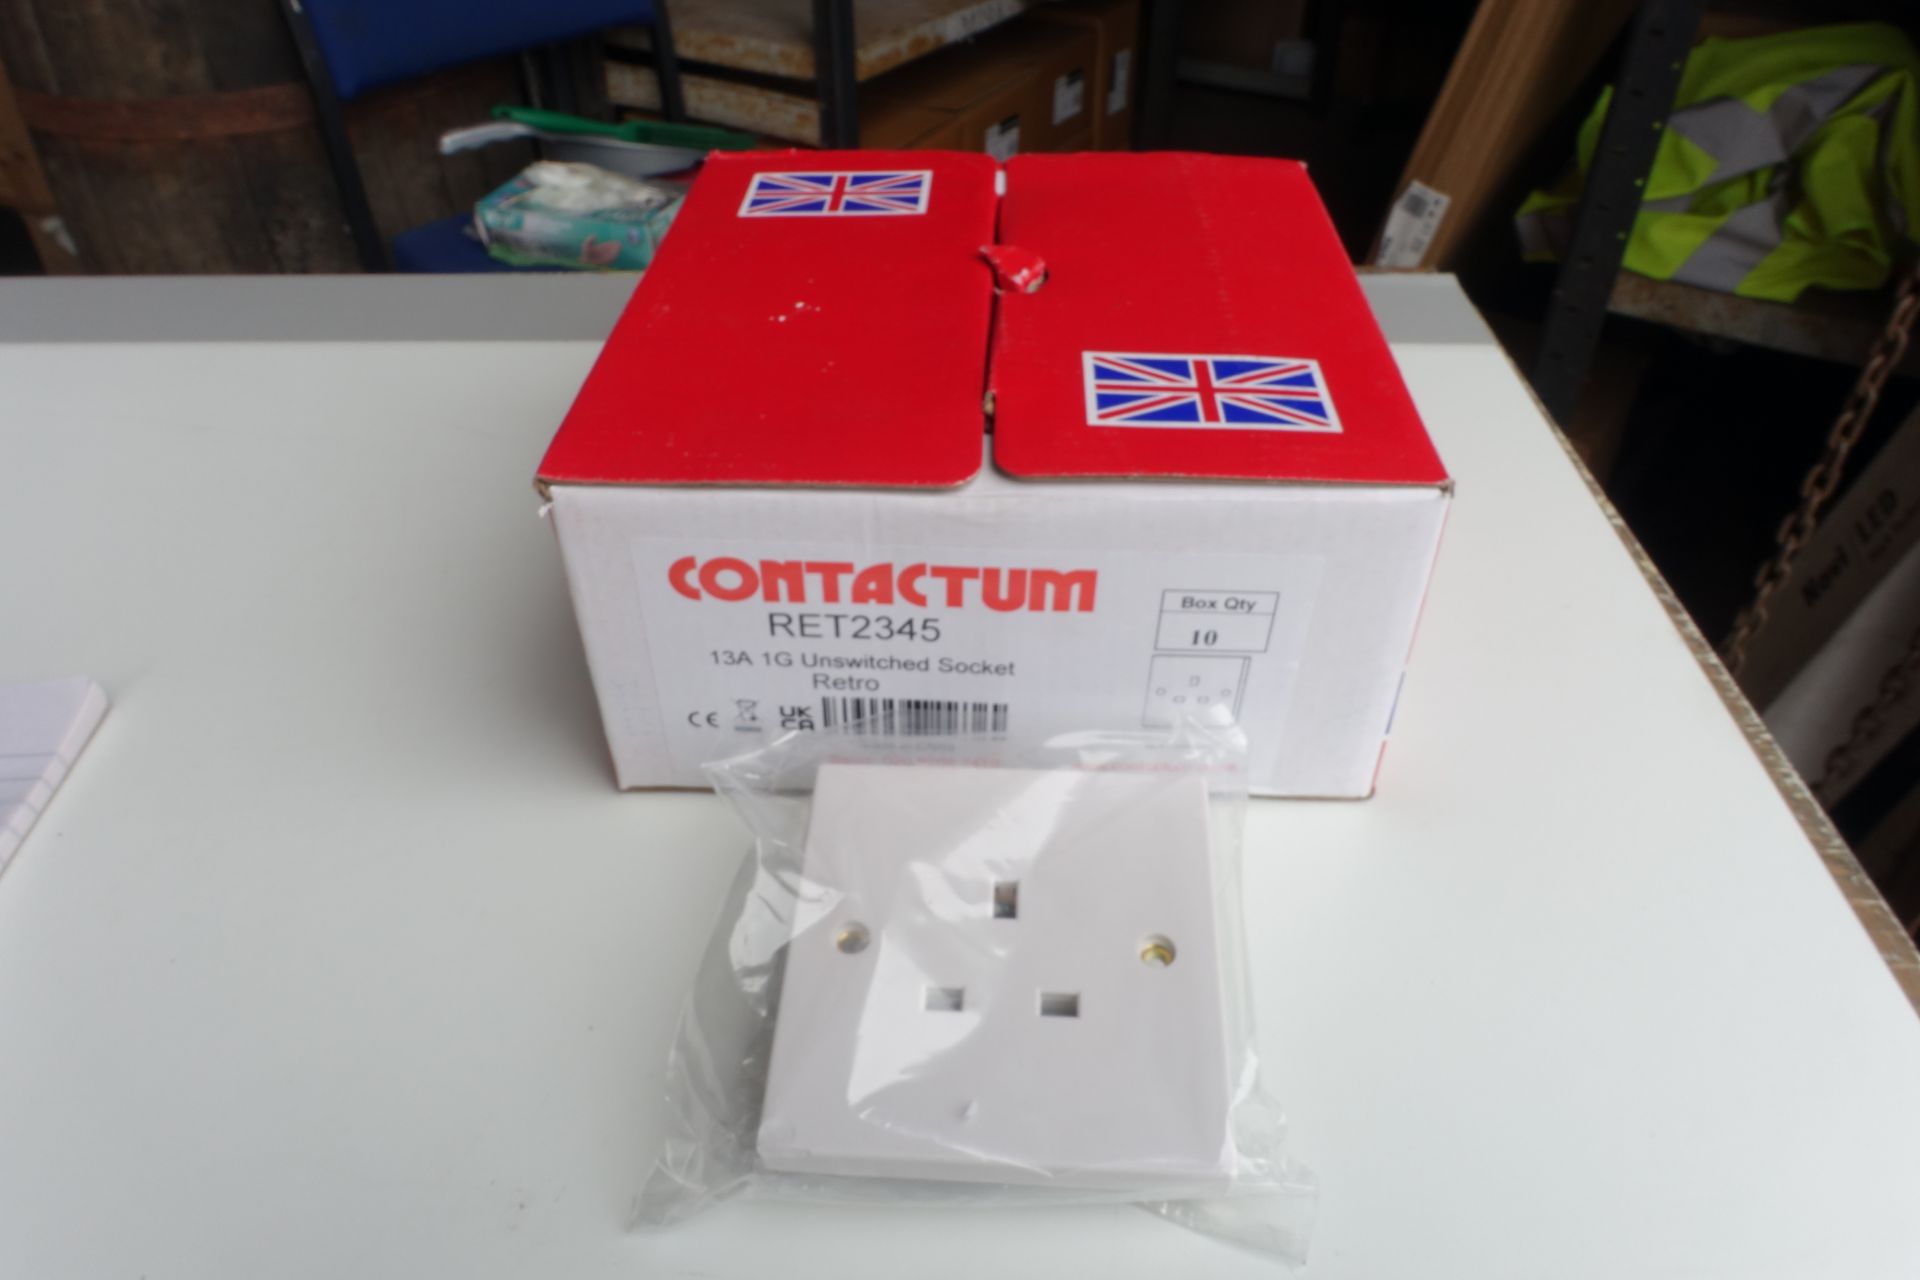 200 x CONTACTUM RET2345 13A 1G Unswitched Socket